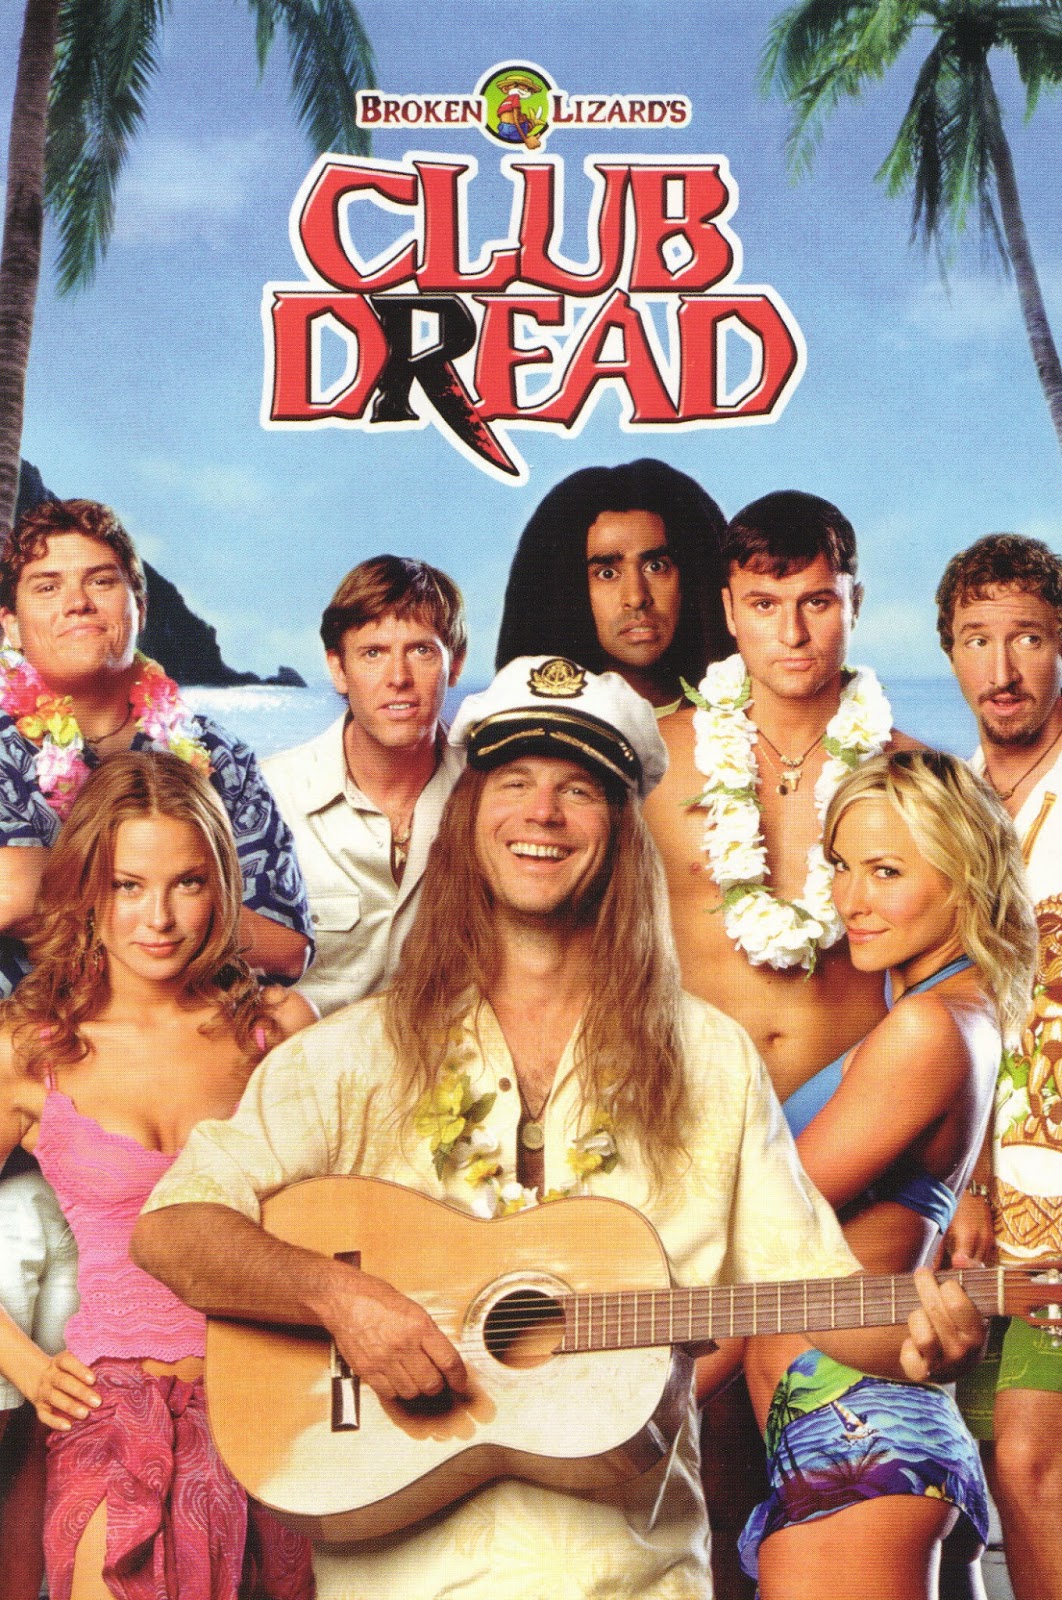 In the Valley of the Sweetness: Broken Lizzard's Club Dread1062 x 1600